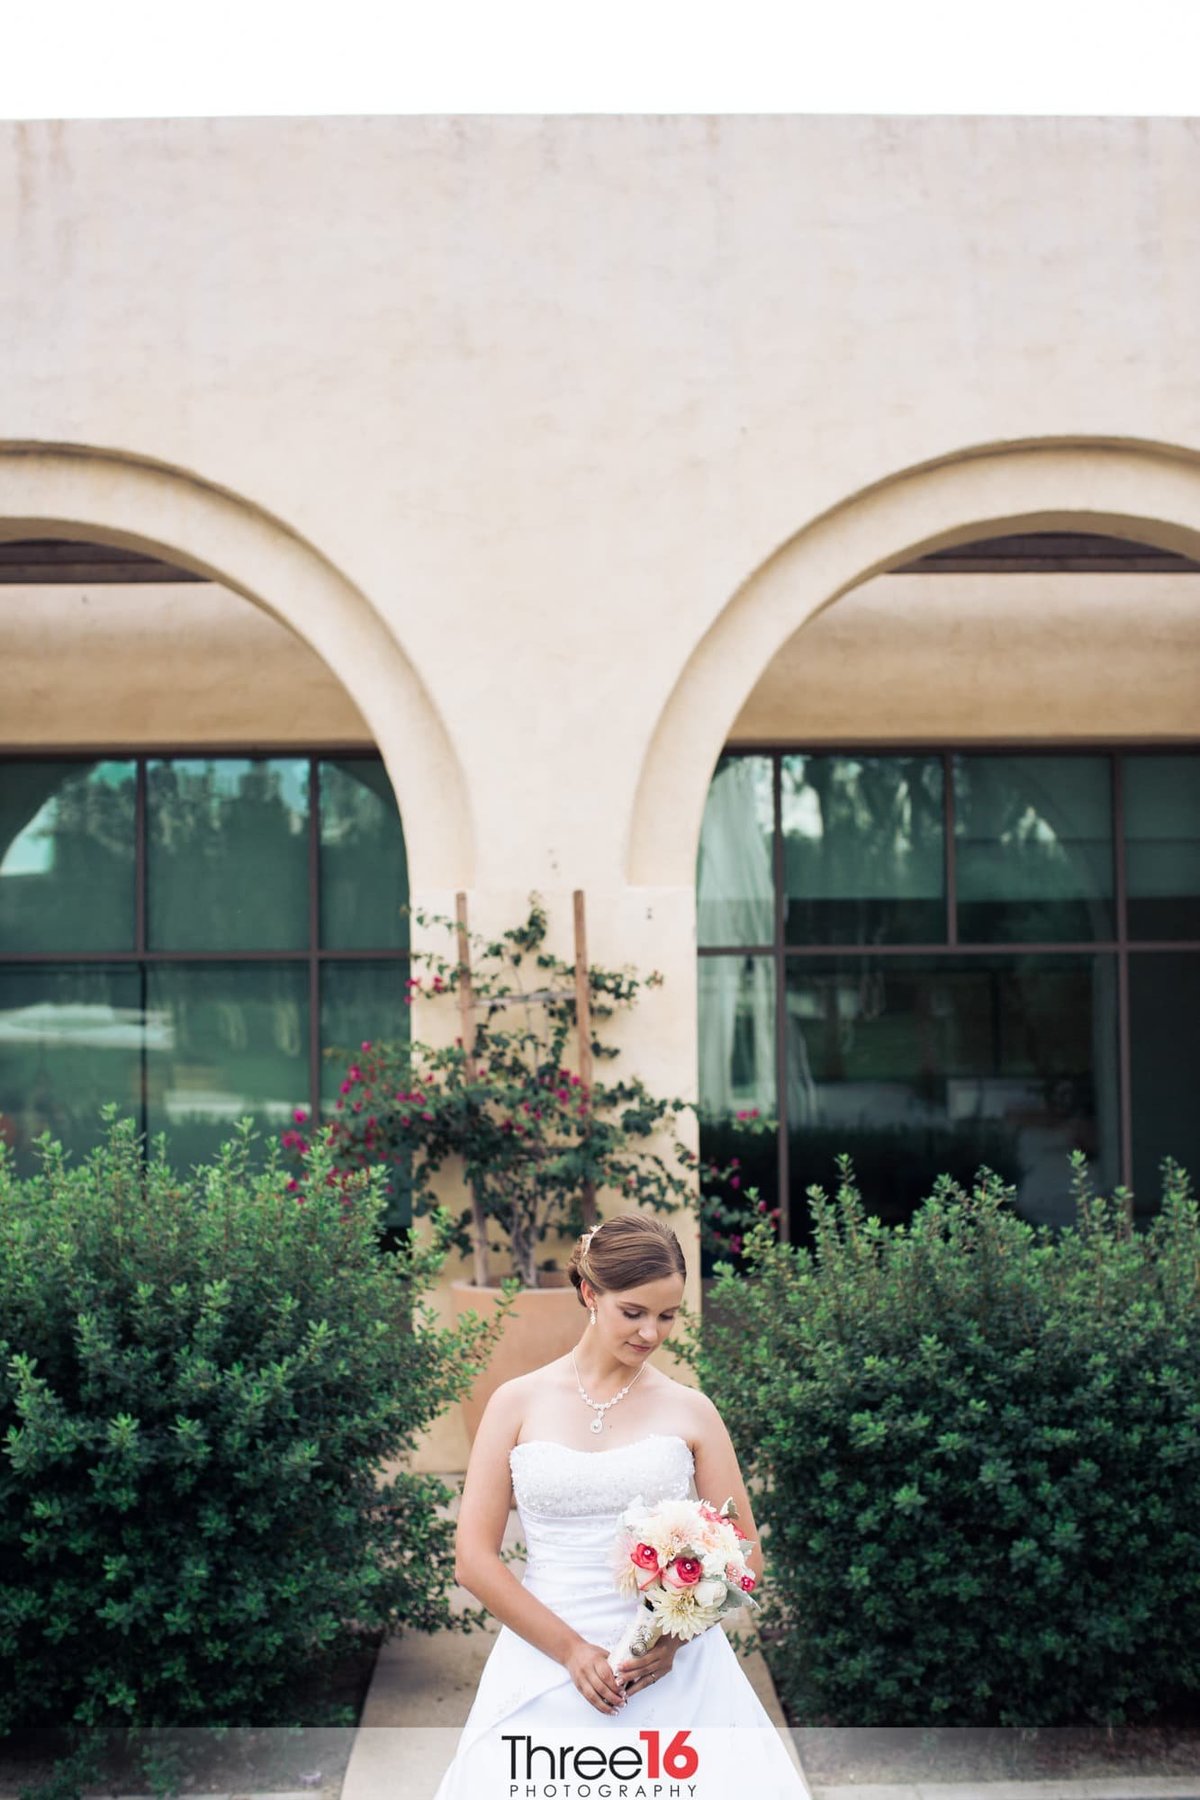 Beautiful Bride posing in front of the Bell Tower Community Center in Rancho Santa Margarita